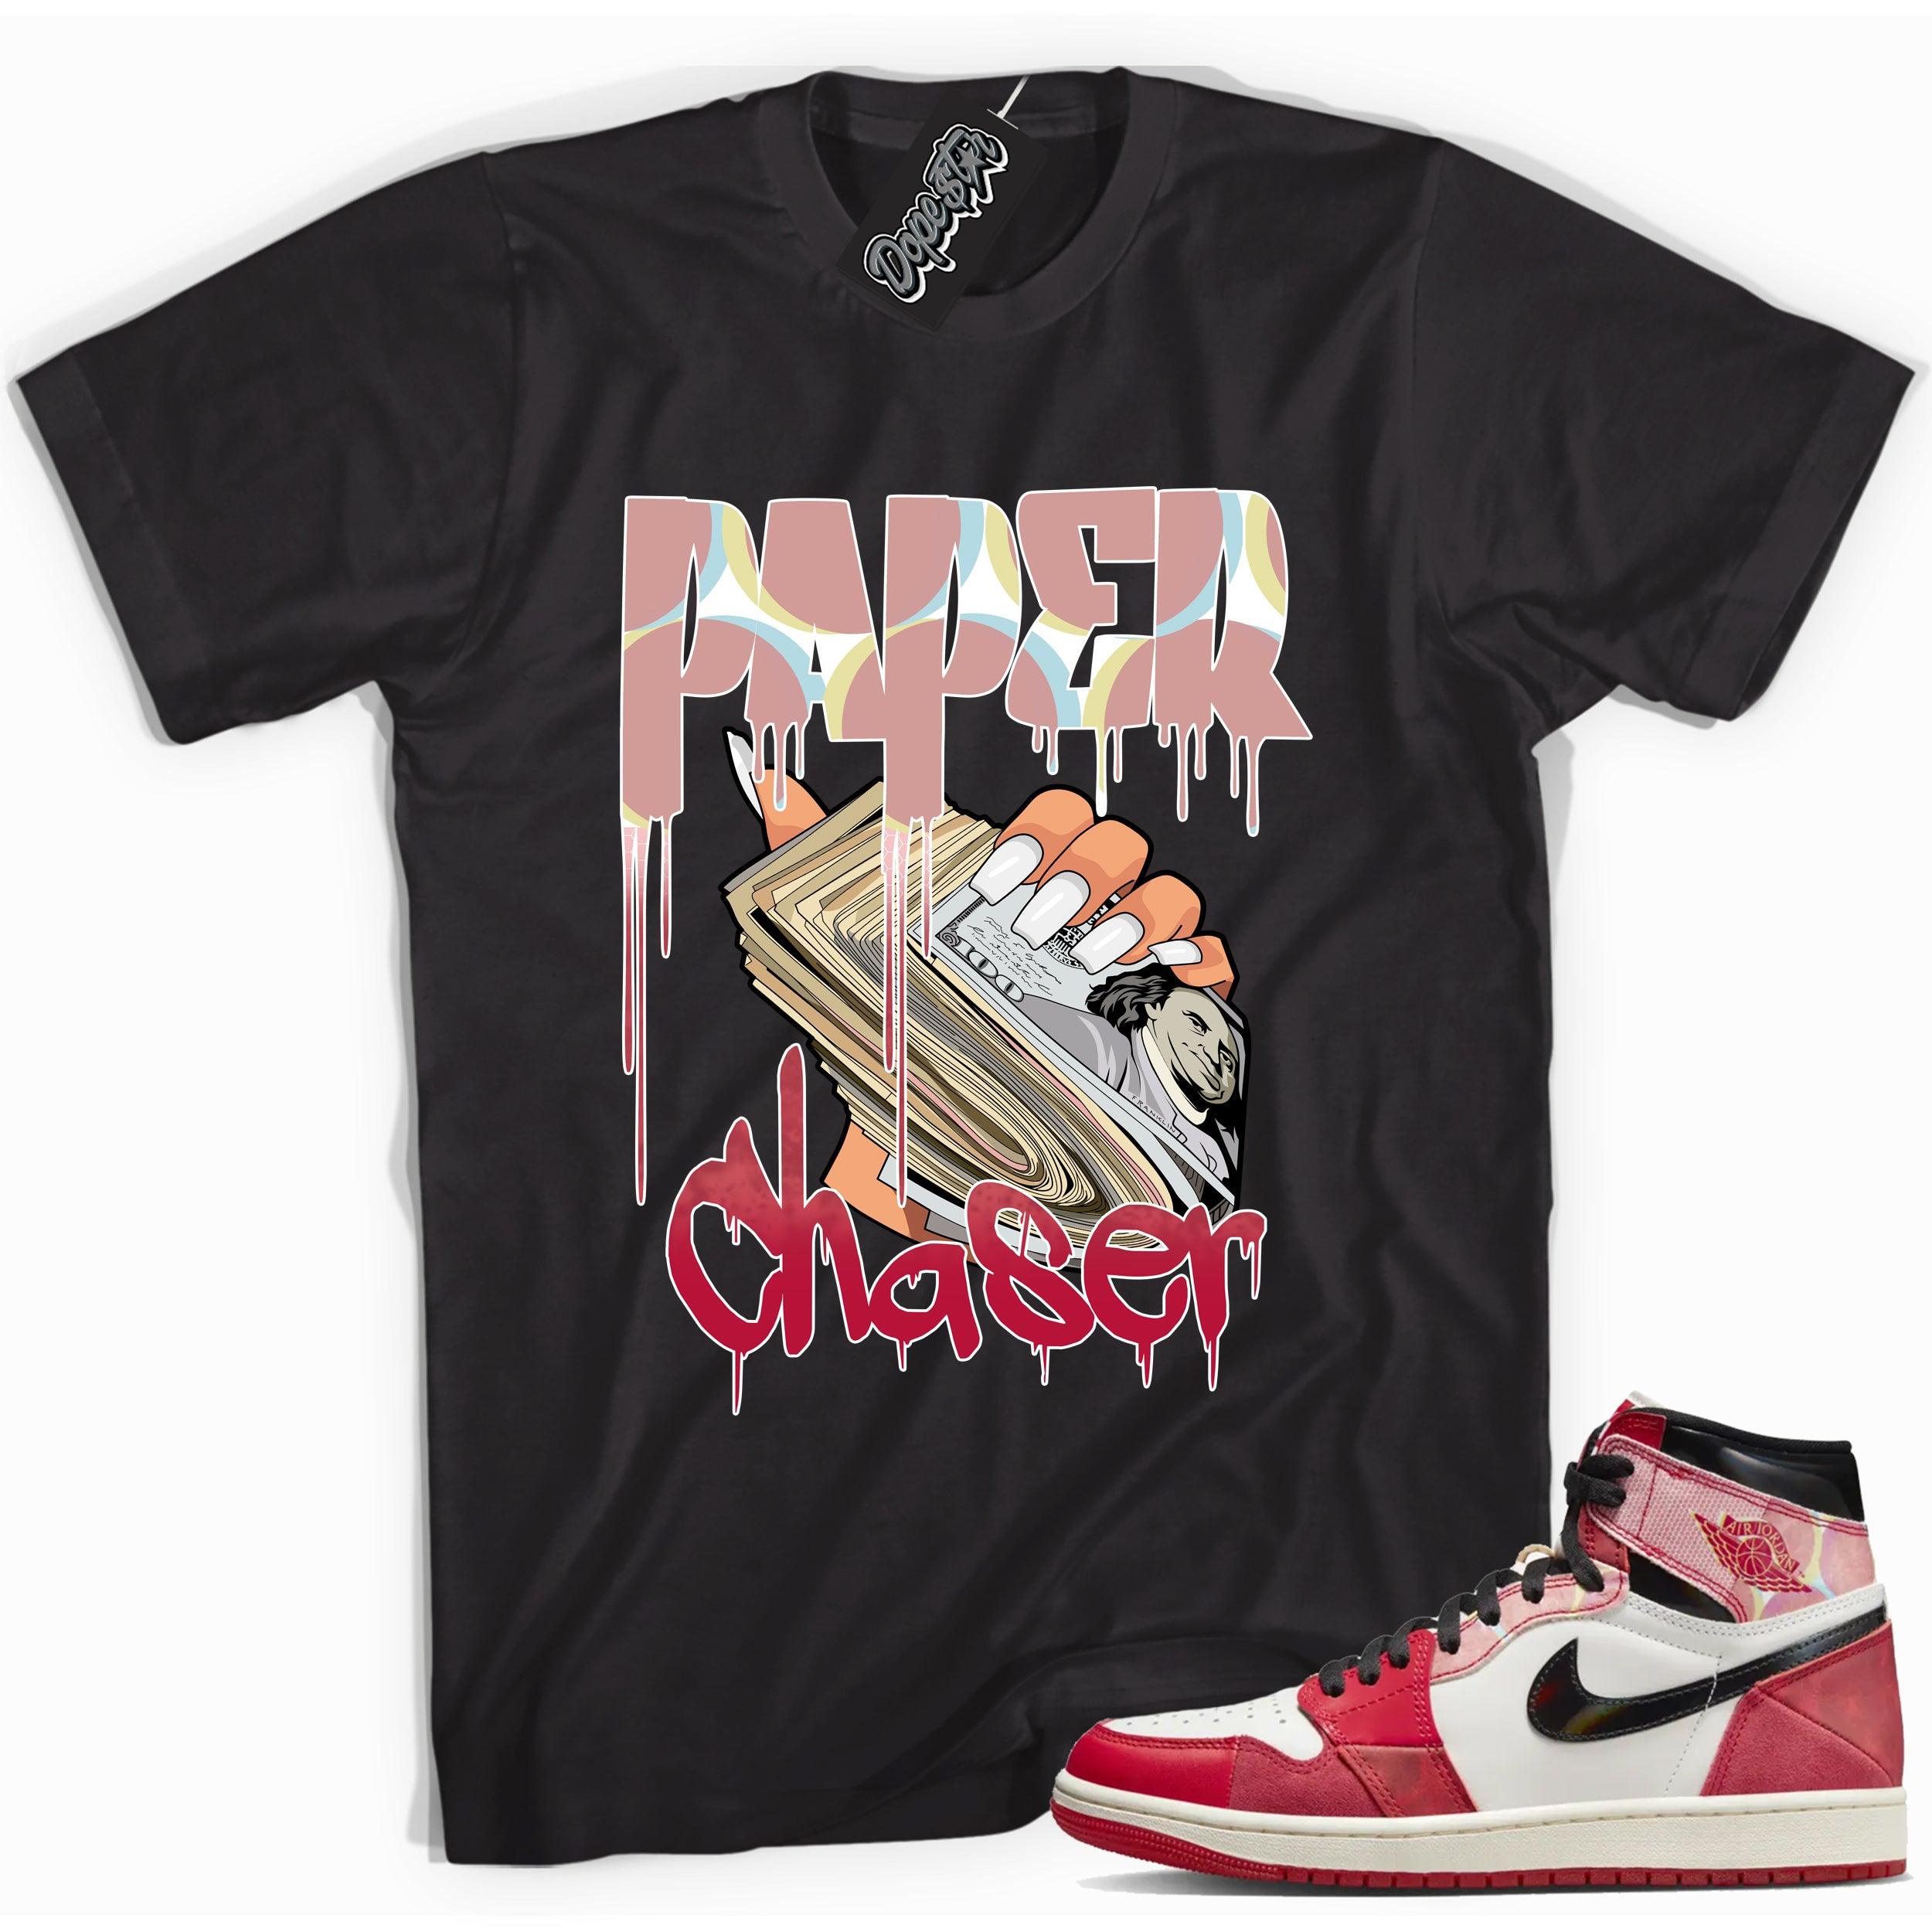 Cool Black graphic tee with “ Paper Chaser ” print, that perfectly matches AIR JORDAN 1 Retro High OG NEXT CHAPTER SPIDER-VERSE  sneakers 